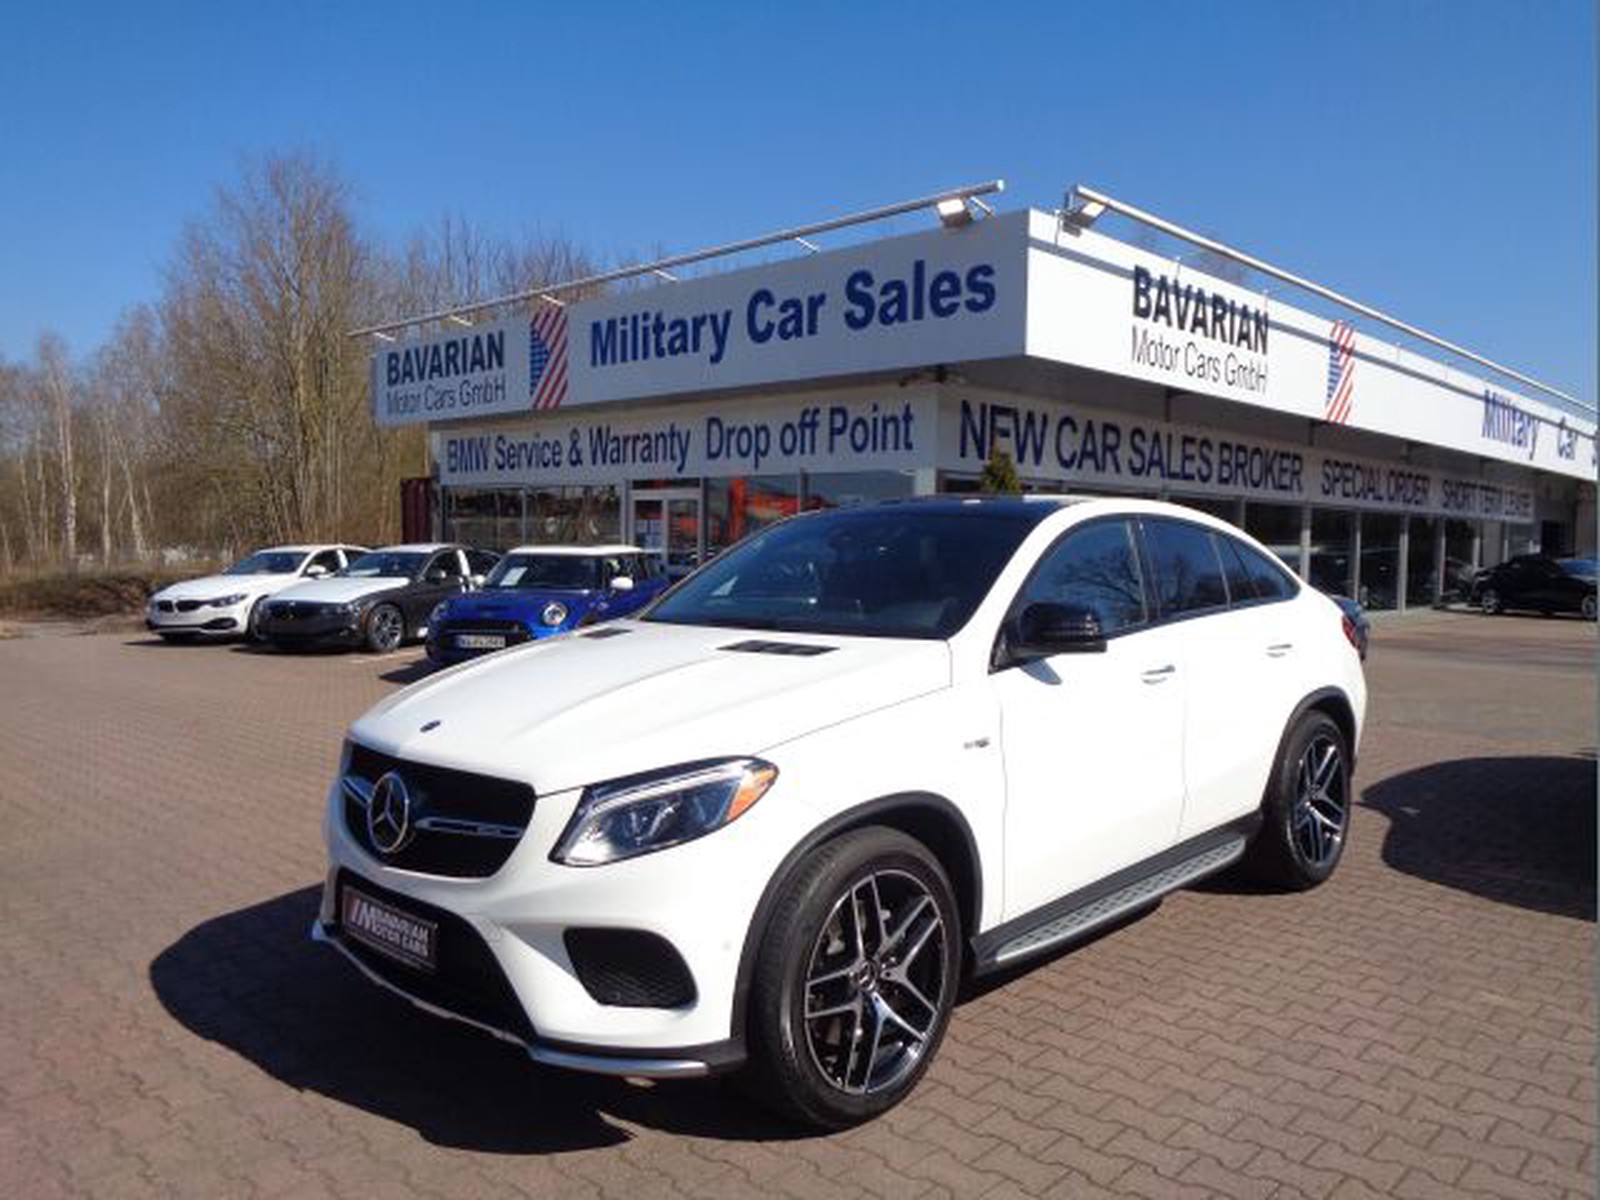 Mercedes Benz Gle 43 Amg Tax Free Military Sales In Ramstein Miesenbach Price 60995 Usd Int Nr U 16395 Sold